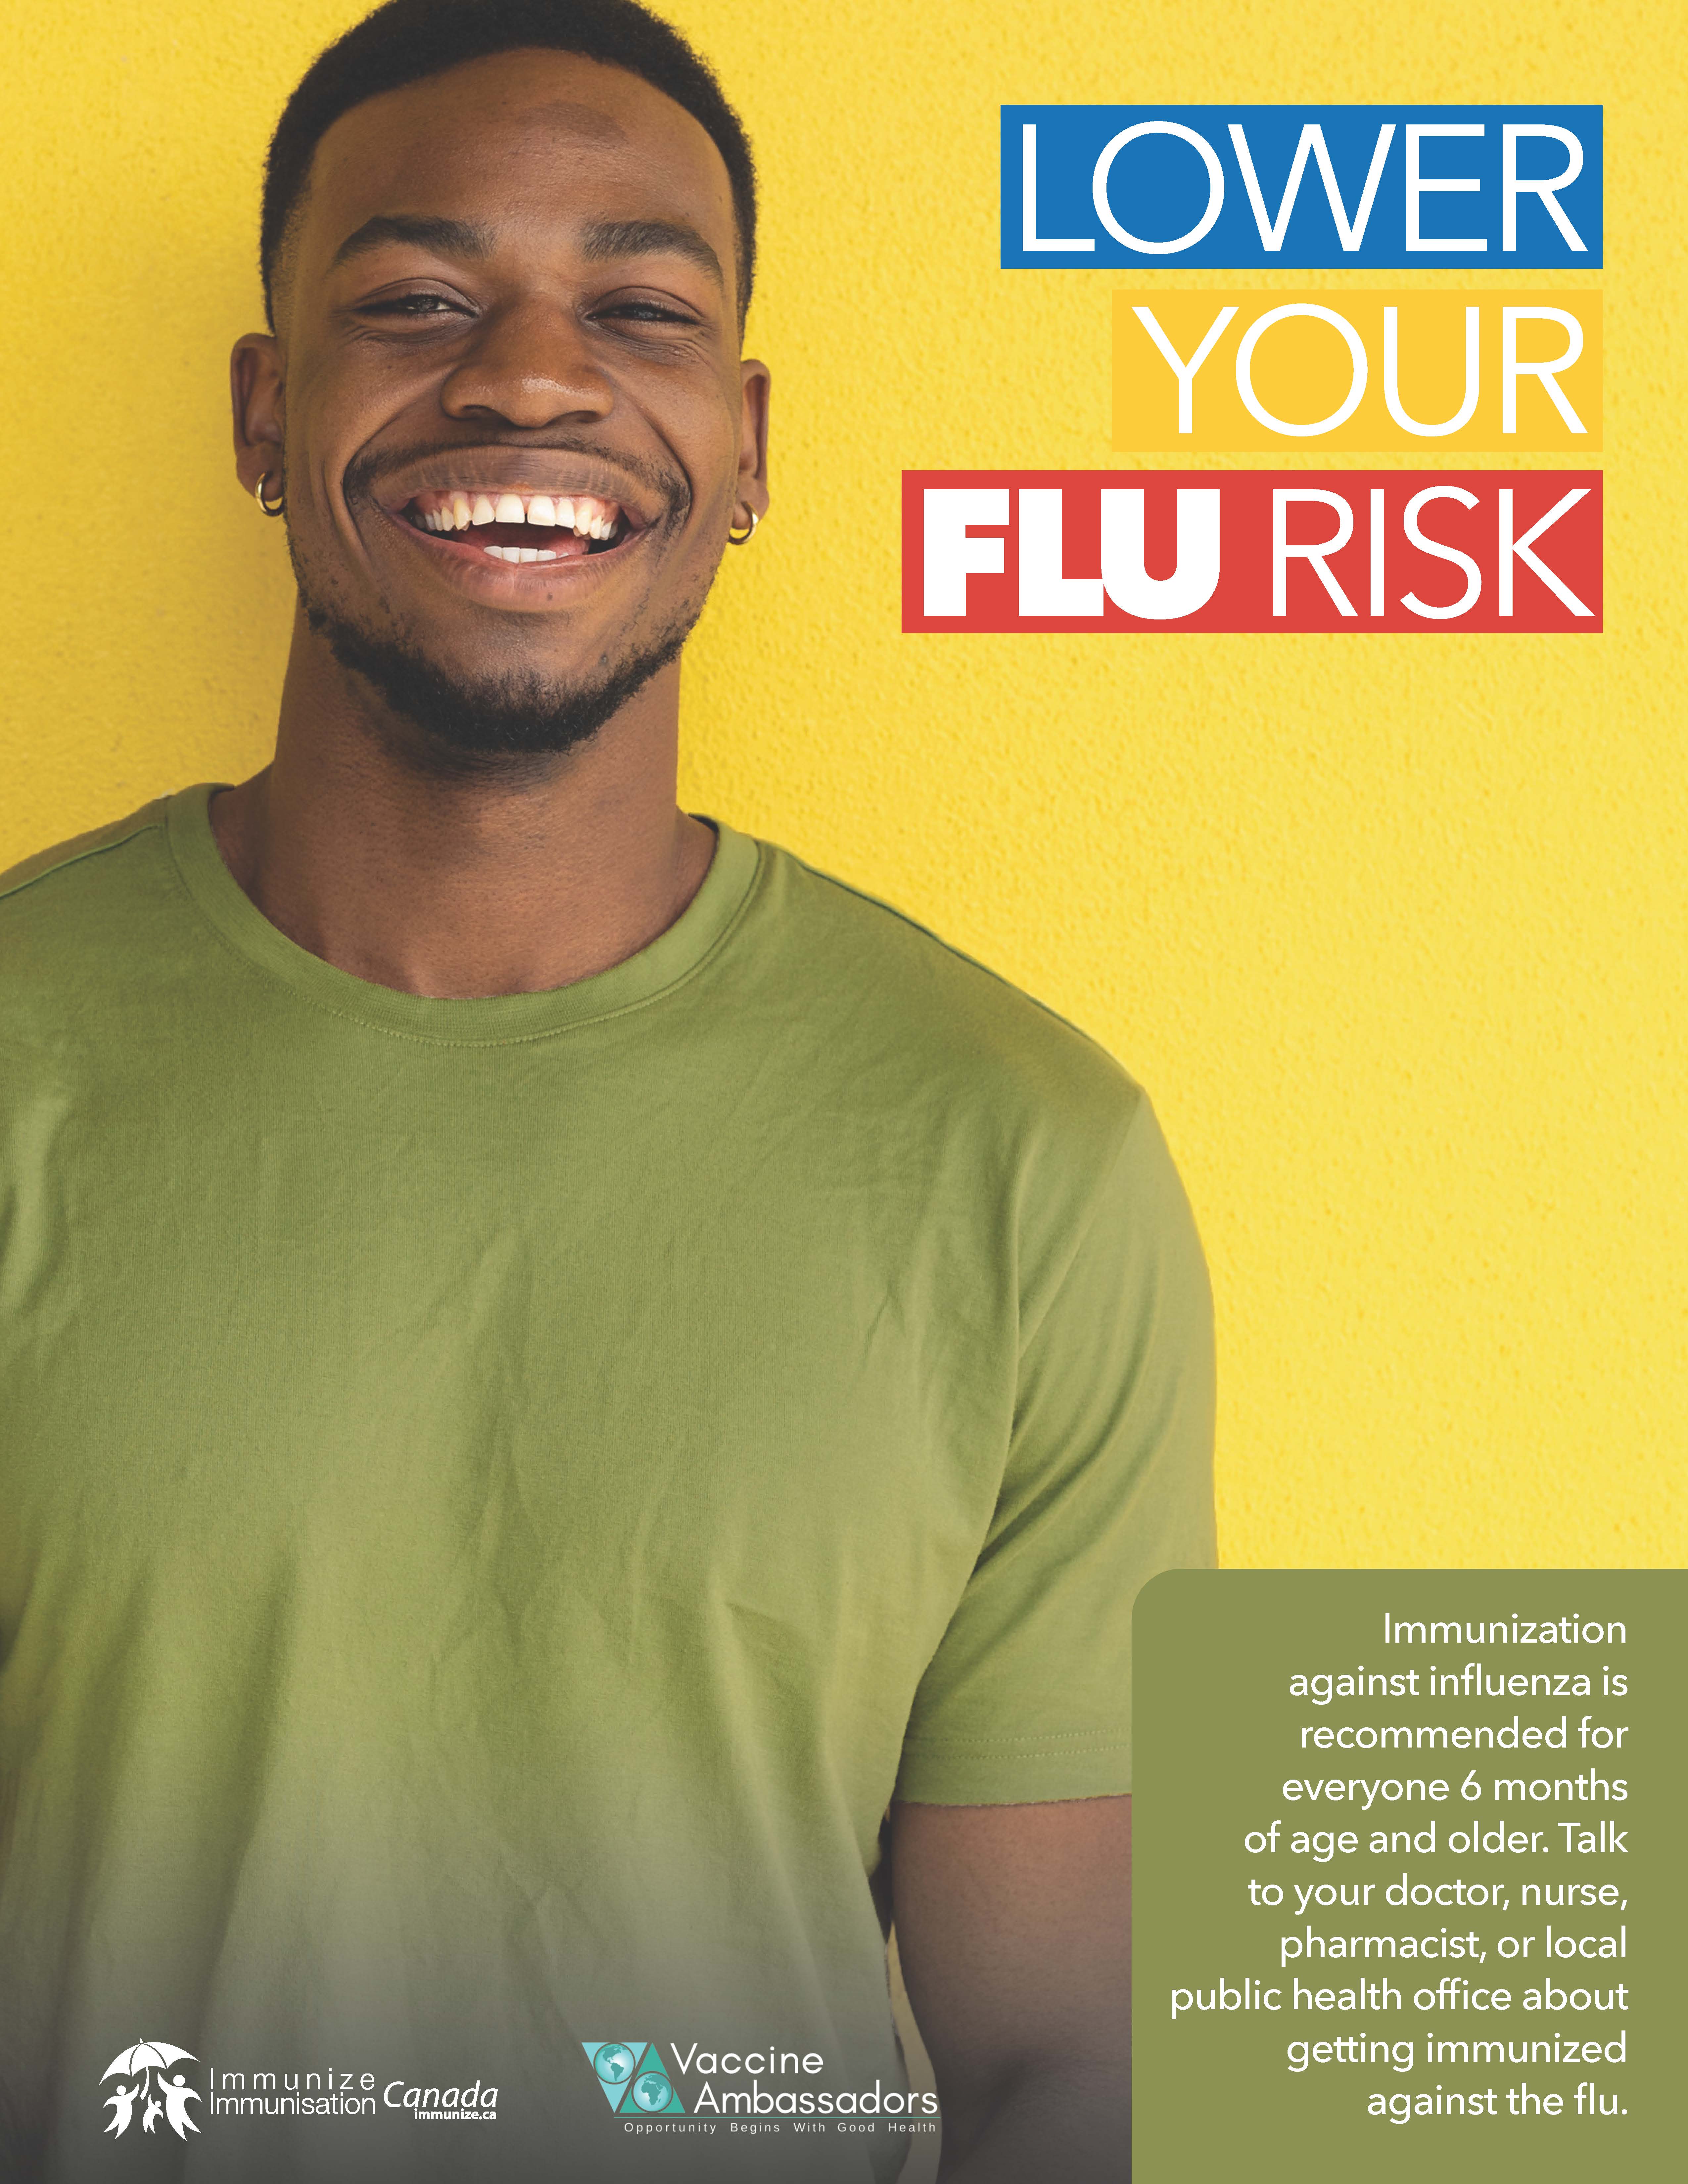 Lower your flu risk - young adults